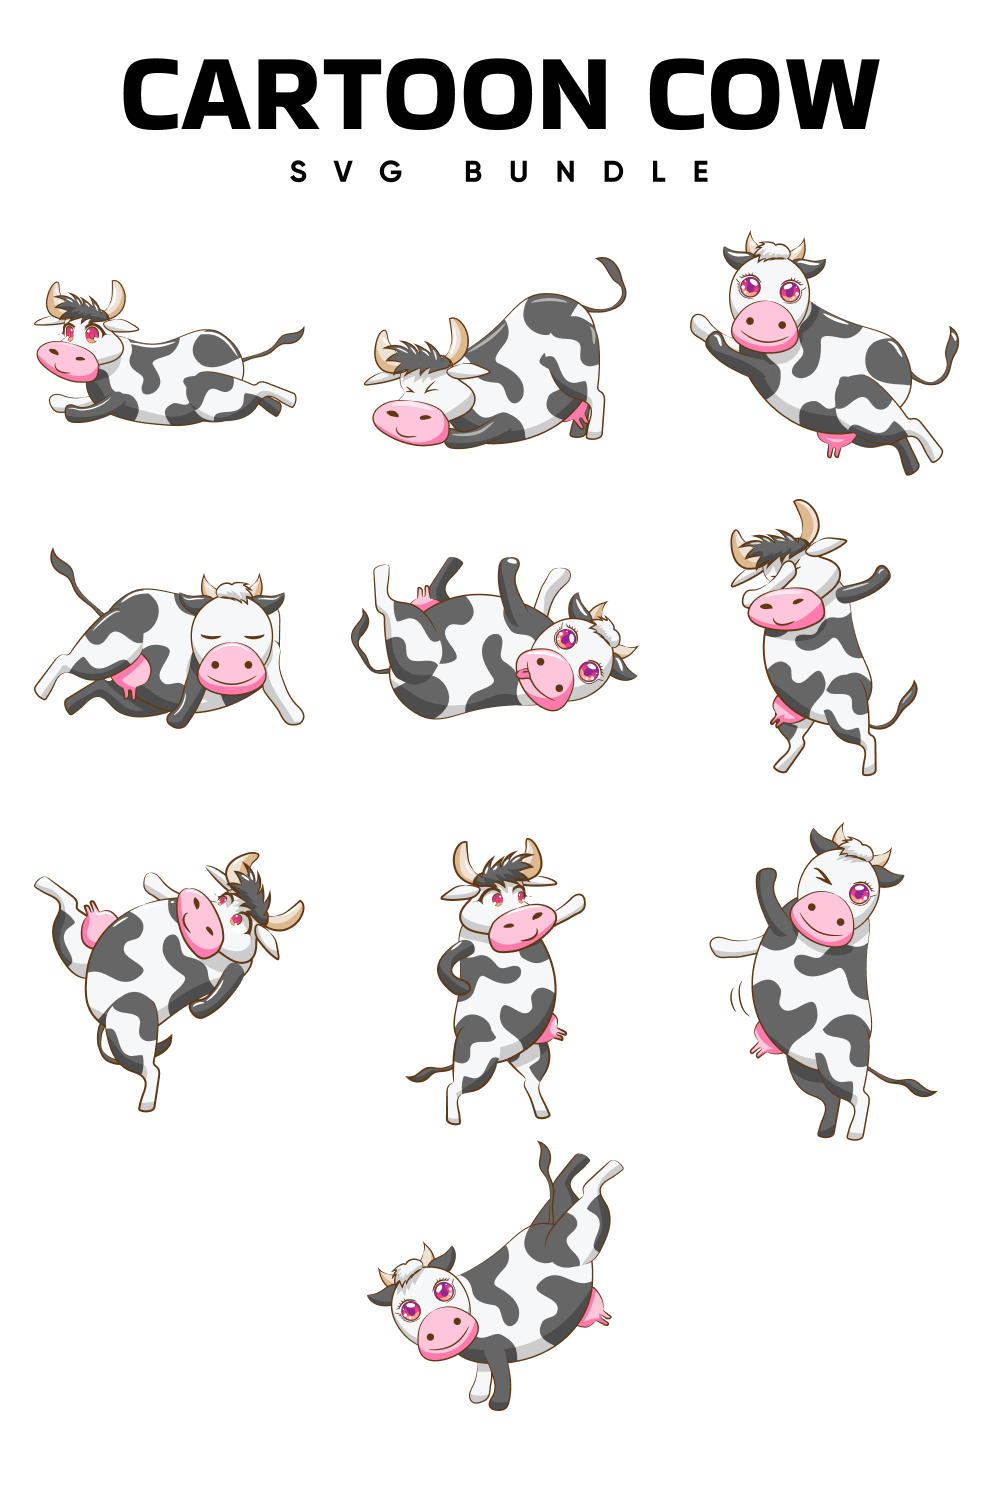 Cartoon cow is shown with different expressions.